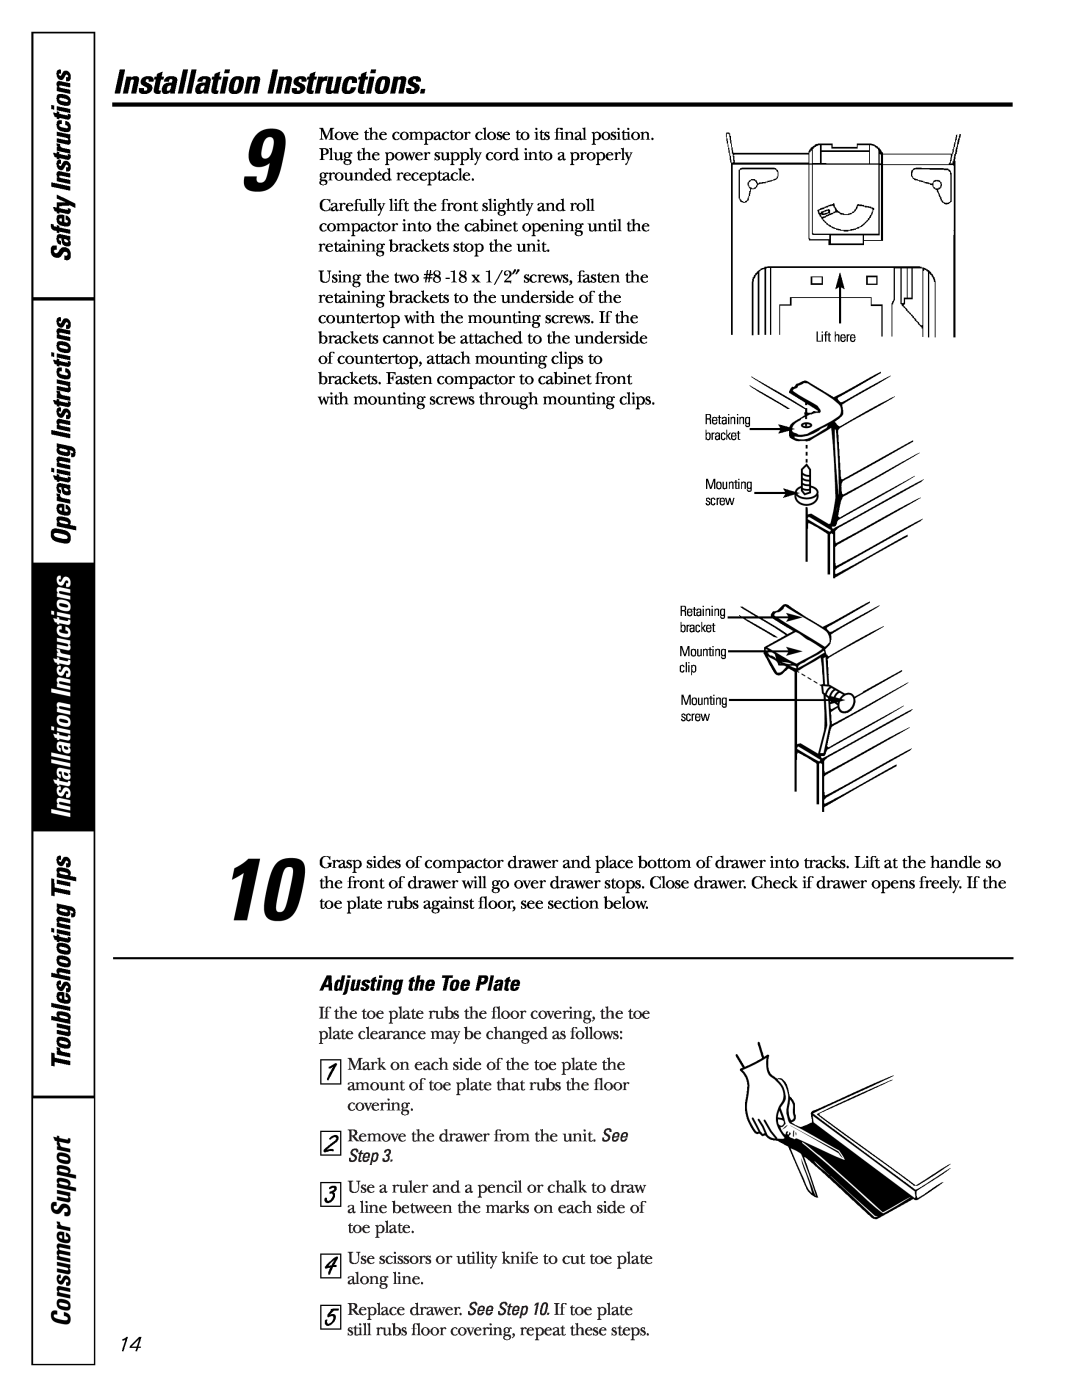 GE GCG1520 operating instructions Adjusting the Toe Plate, Installation Instructions 